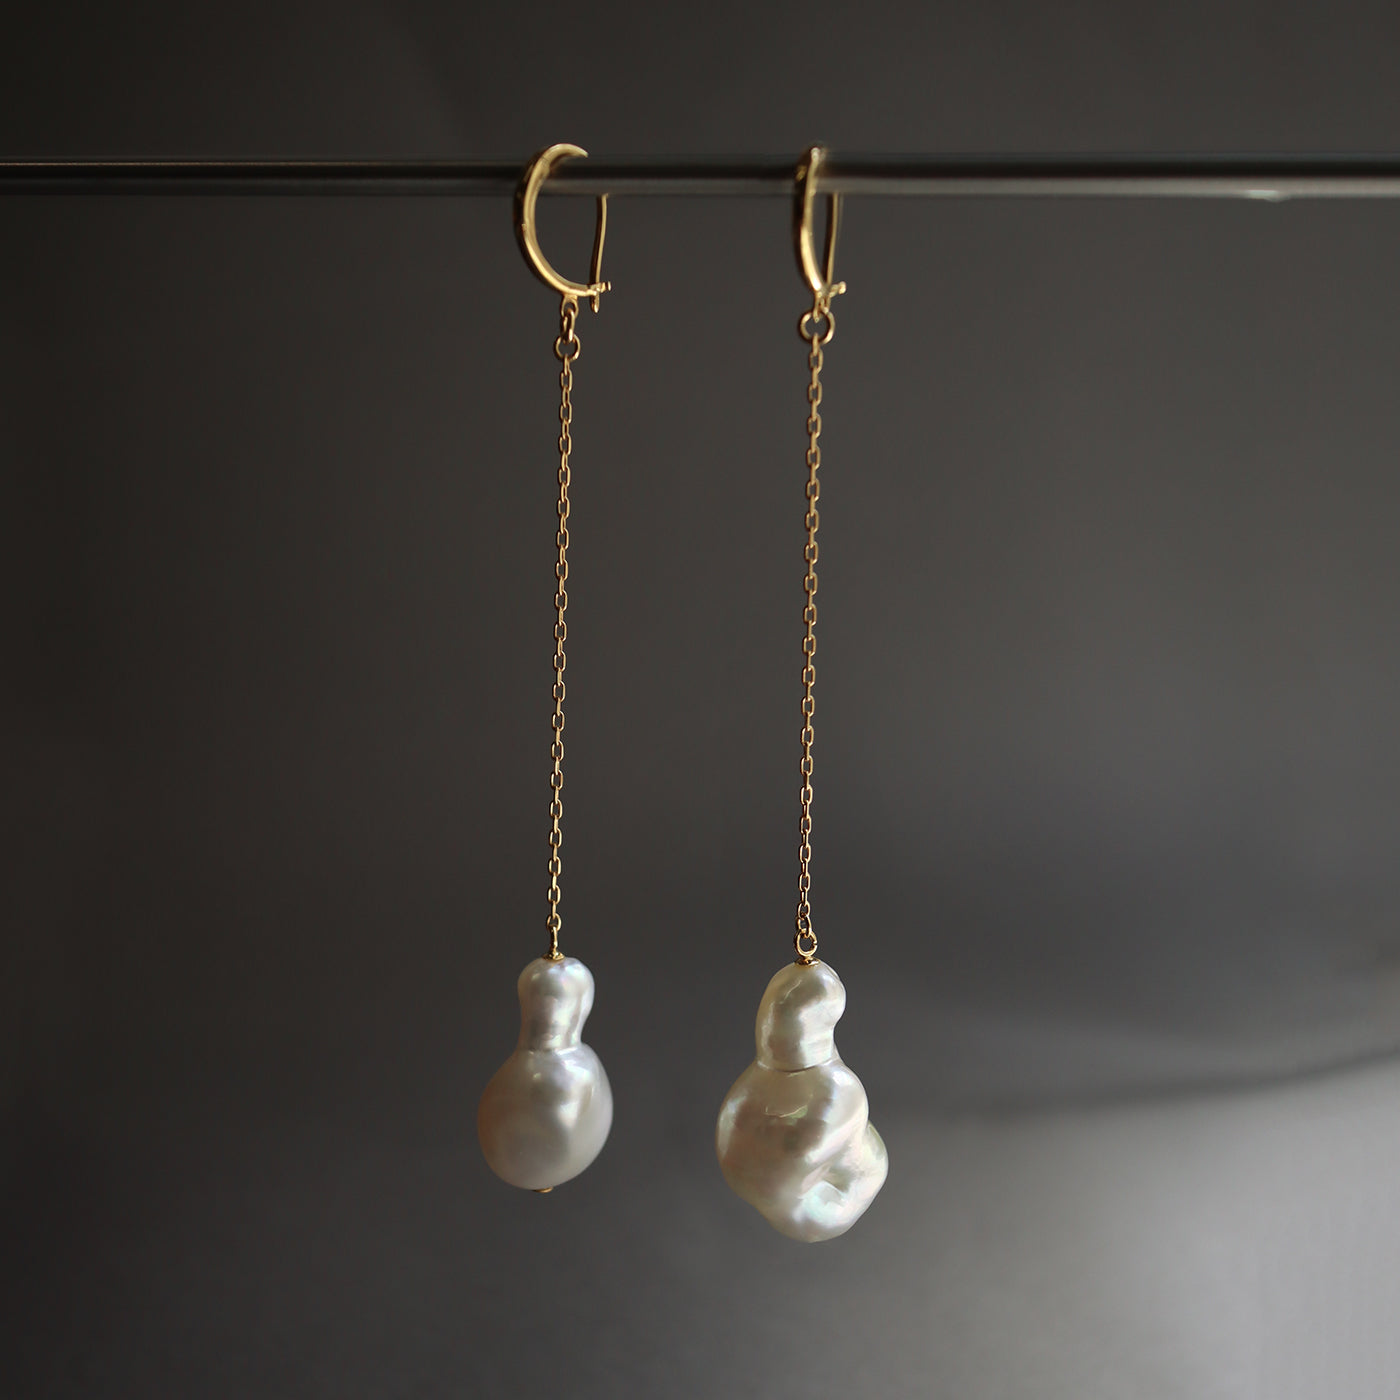 【OUTLET】Baroque Pearl Chain Earrings - 白蝶バロックパール